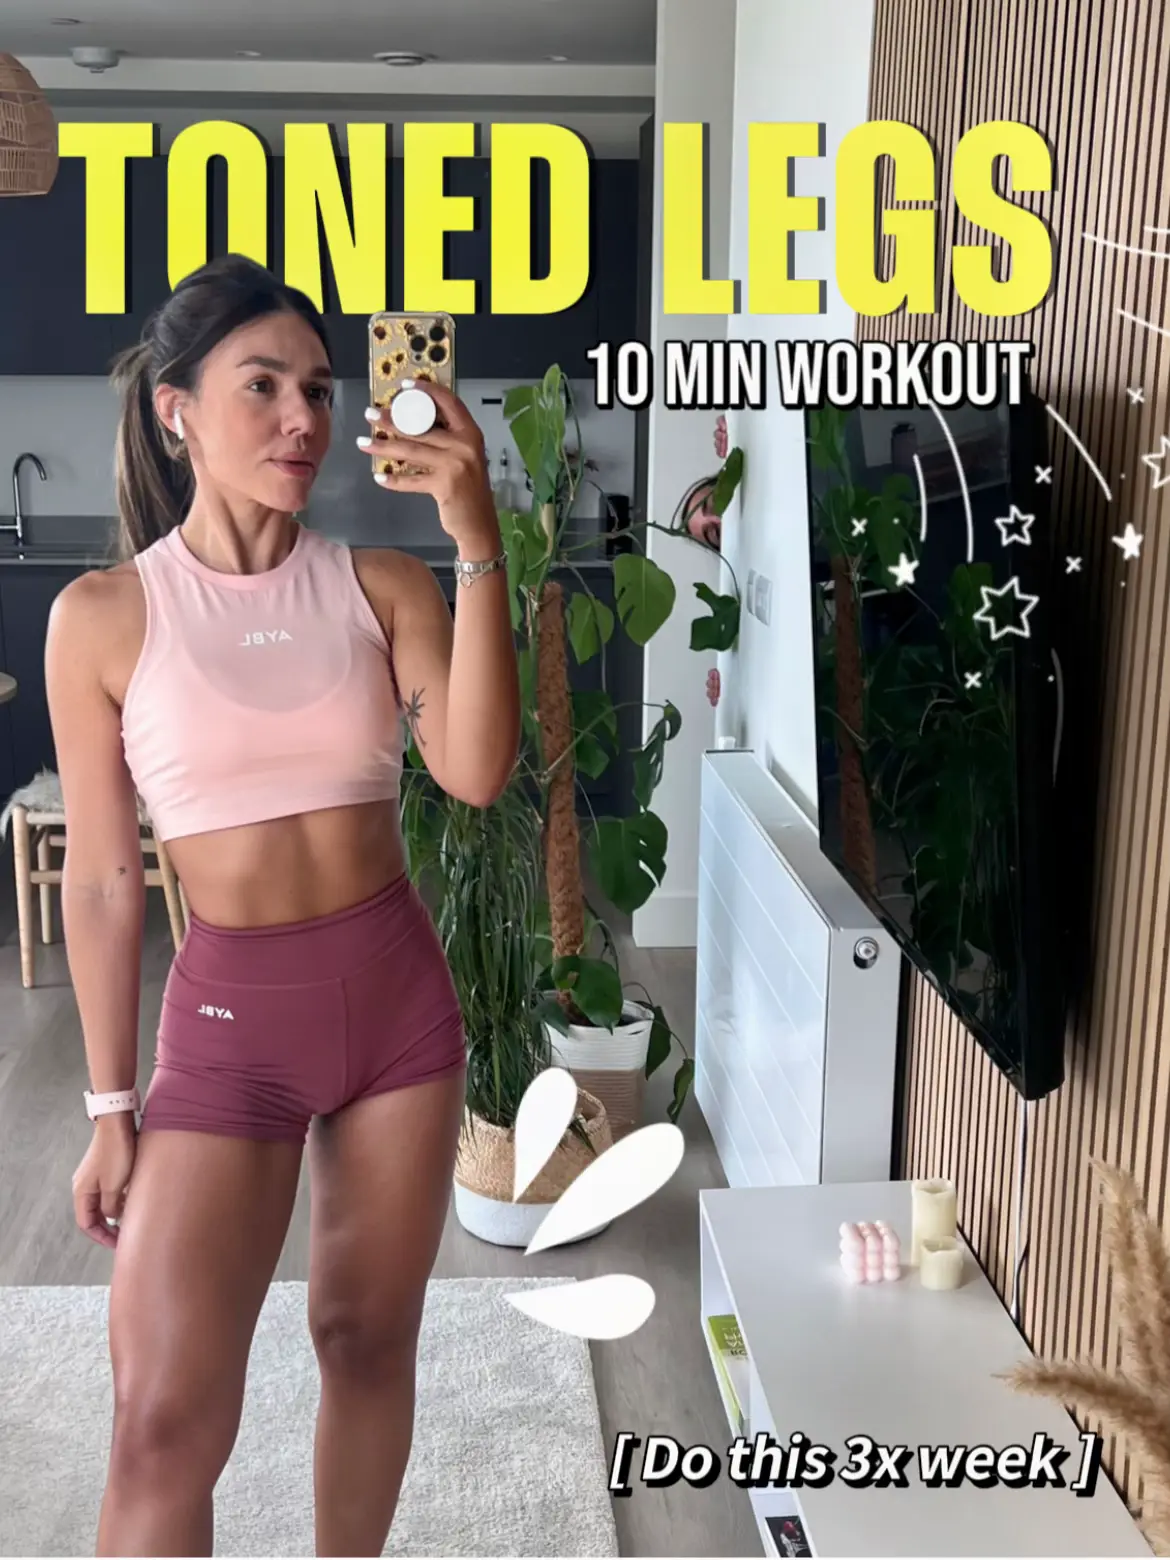 10 MINUTE workout for TONED ARMS💪🏻, Video published by Angel Kenzitt